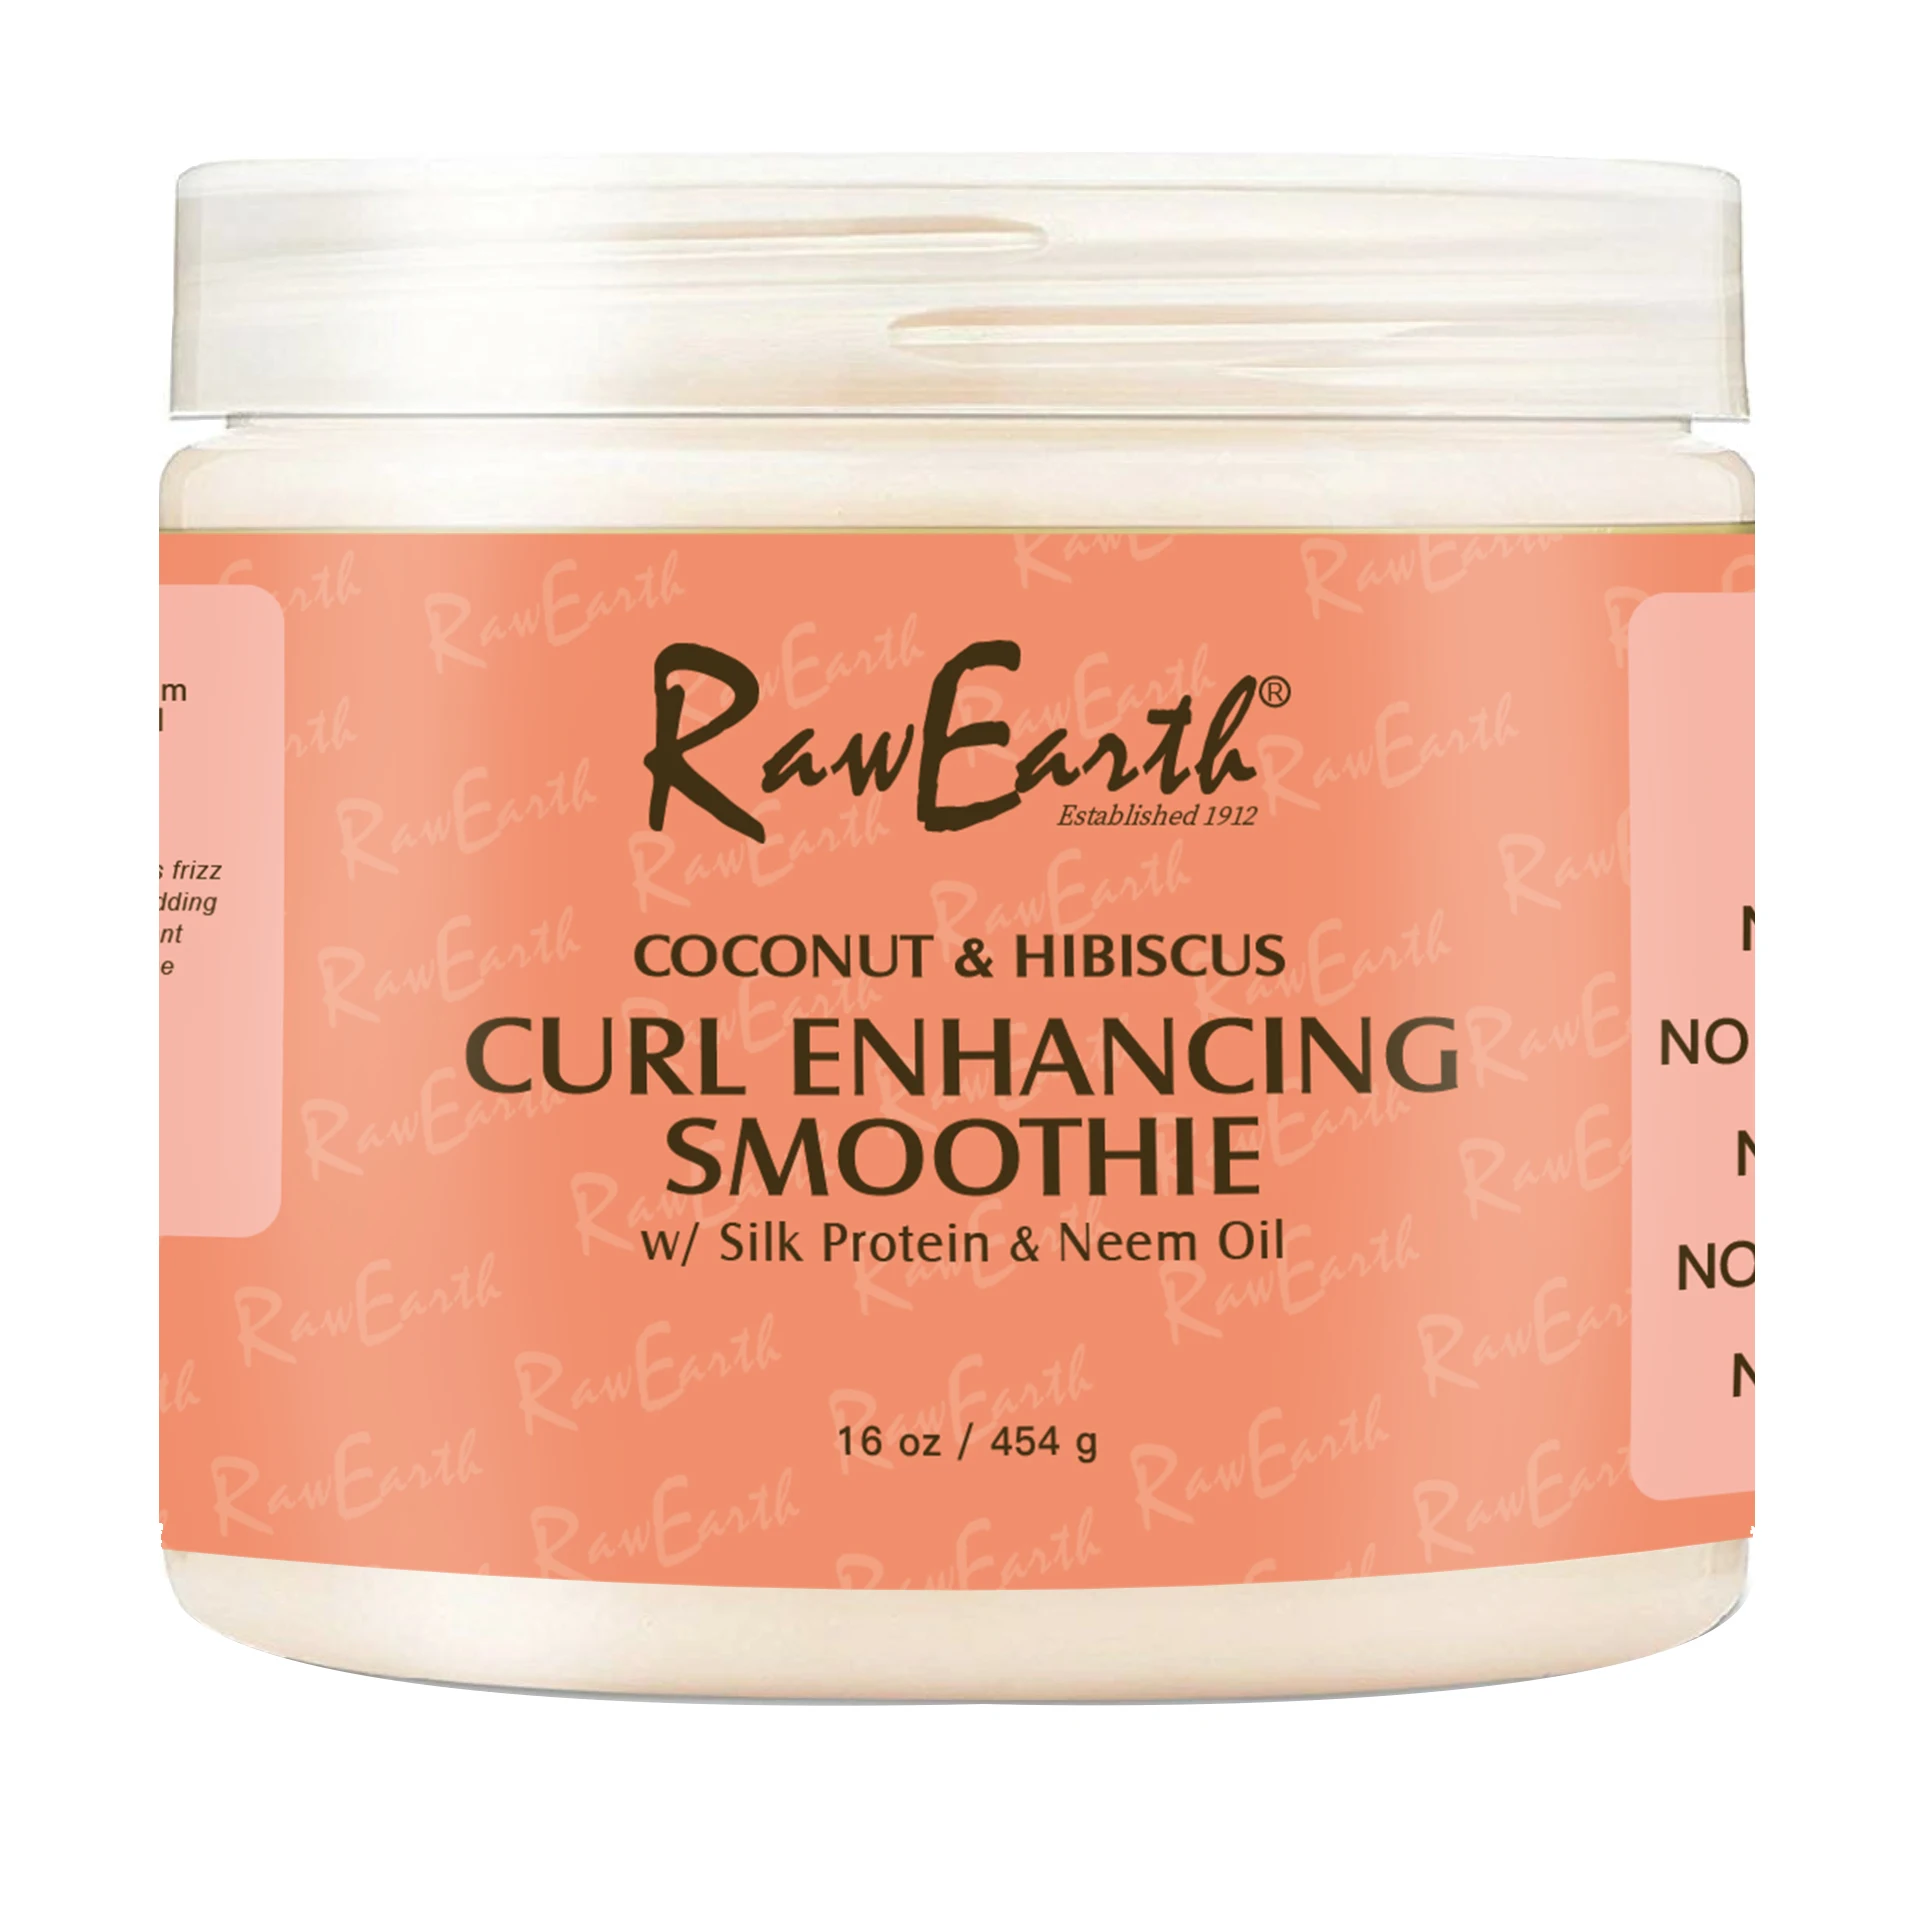 

Raw Earth Hydration and Shine hair cream Coconut Hibiscus Curl Enhancing Smoothie for Defining Curls